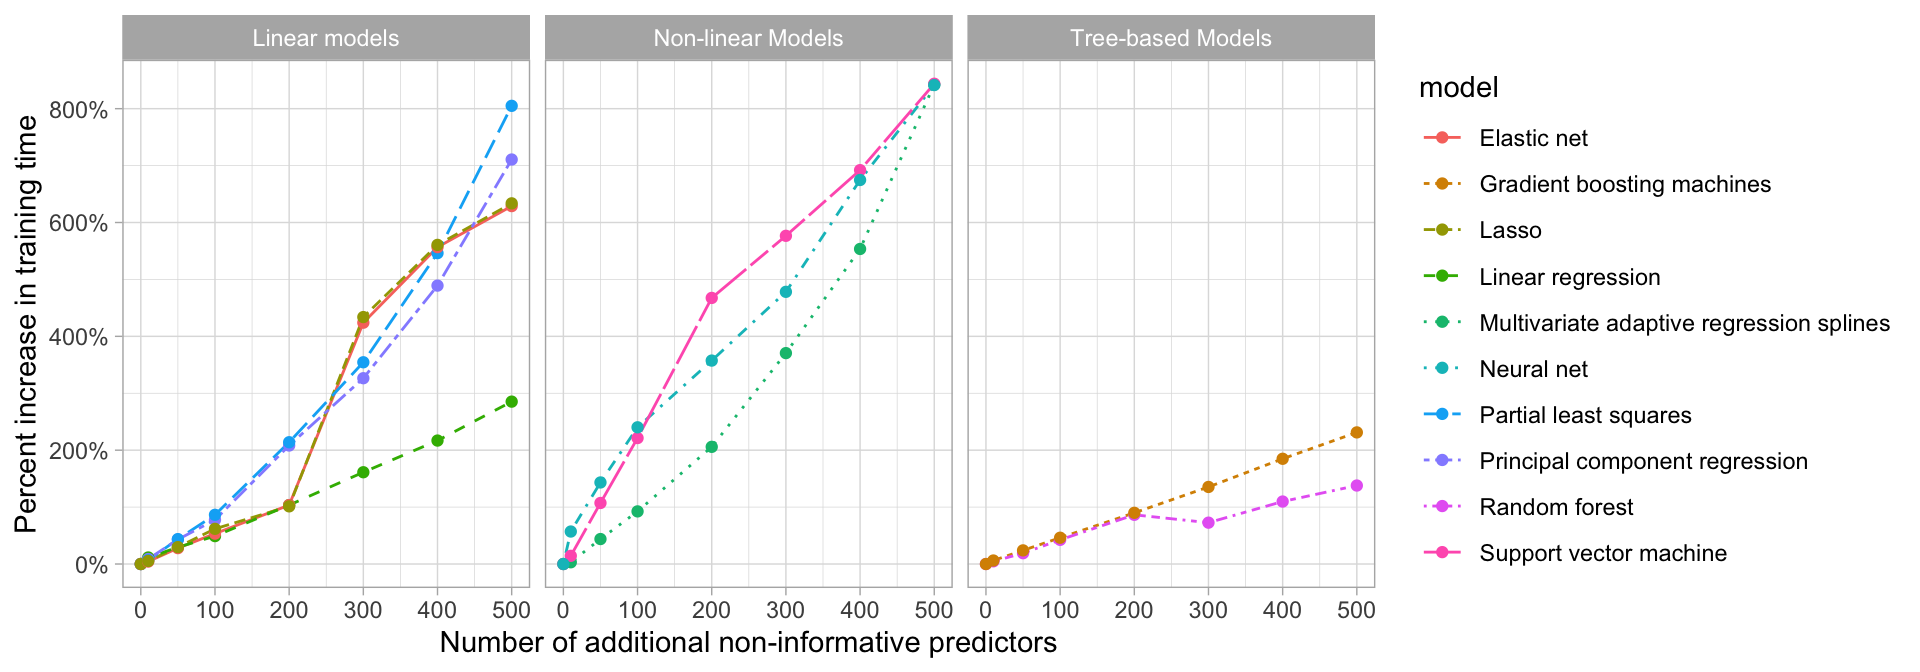 Impact in model training time as non-informative predictors are added.